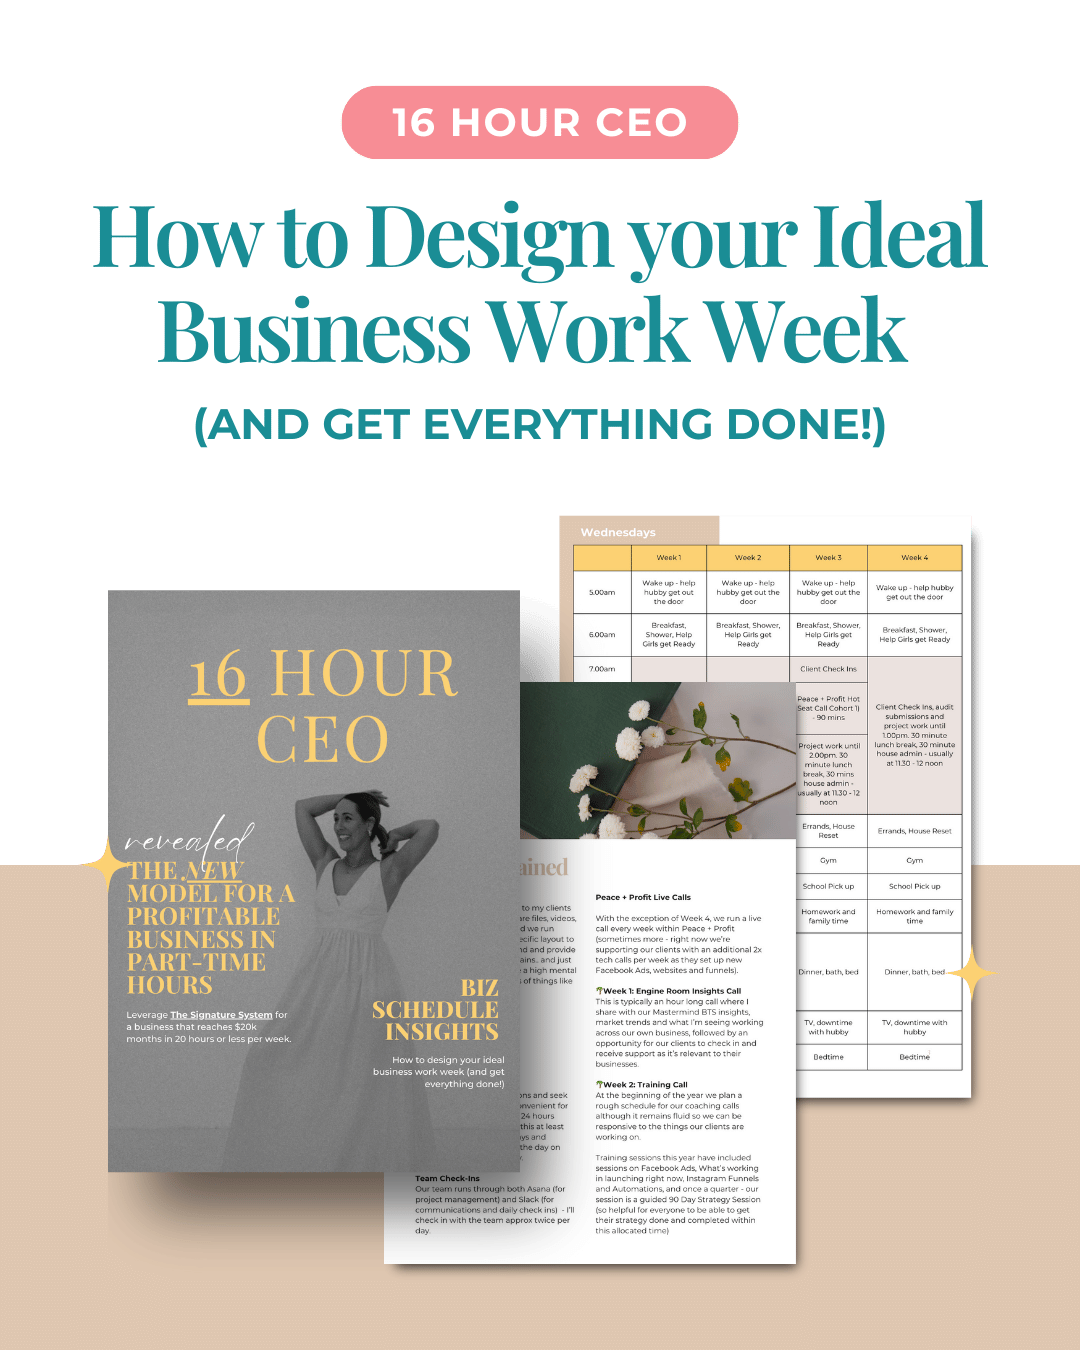 16 hour CEO - How to Design your Ideal Business Work Week 